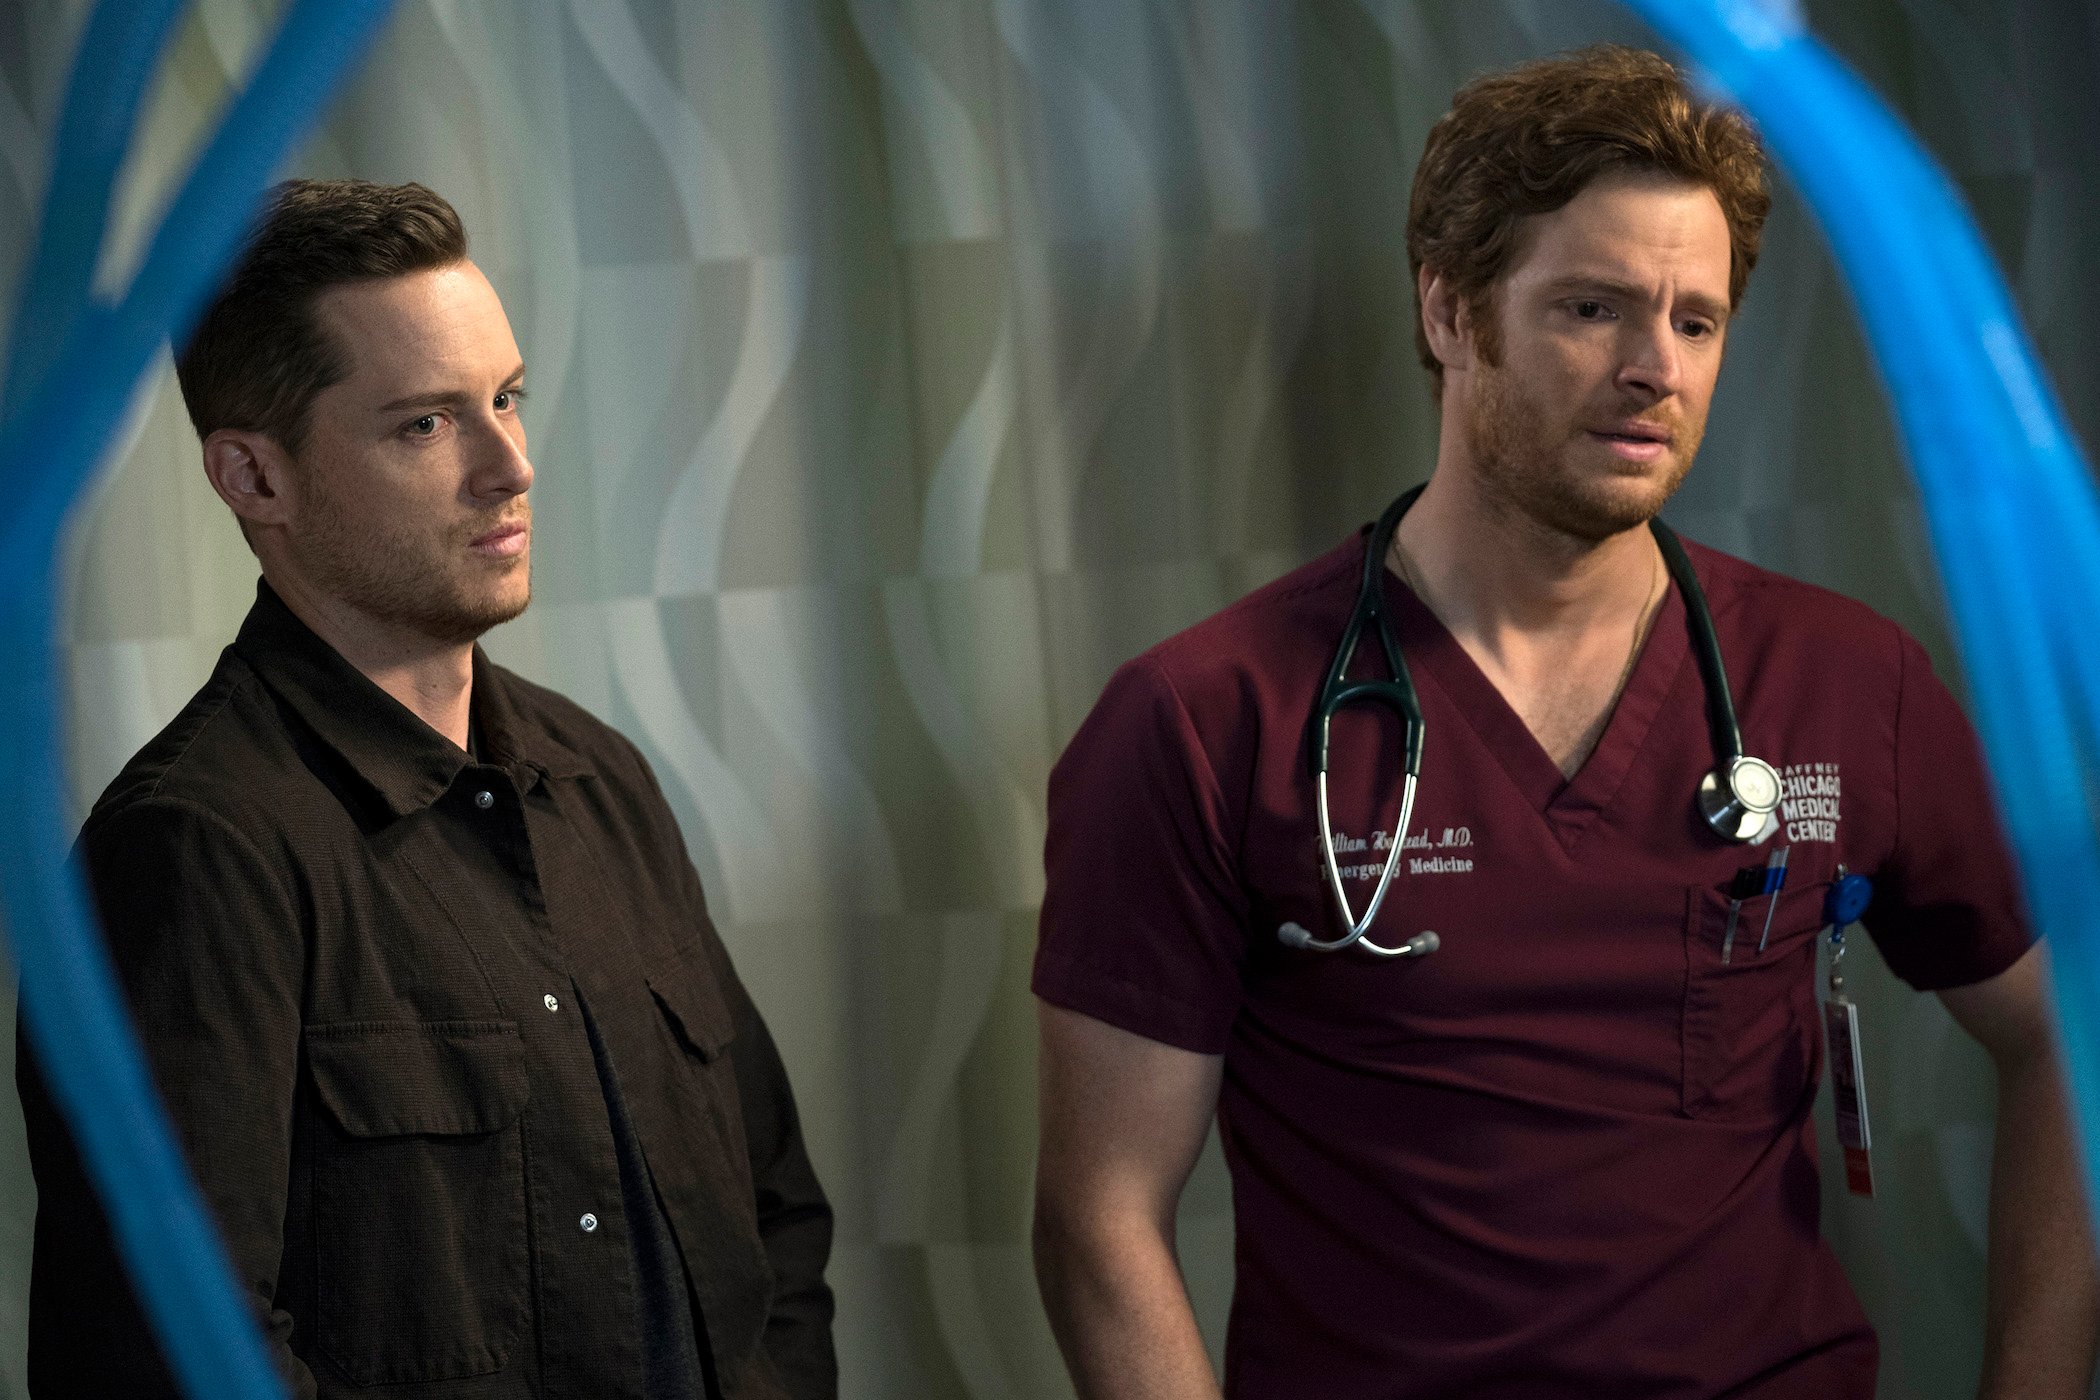 Jesse Lee Soffer as Jay Halstead in 'Chicago P.D.' Season 9 and Nick Gehlfuss as Will Halstead in 'Chicago Med' Season 7 